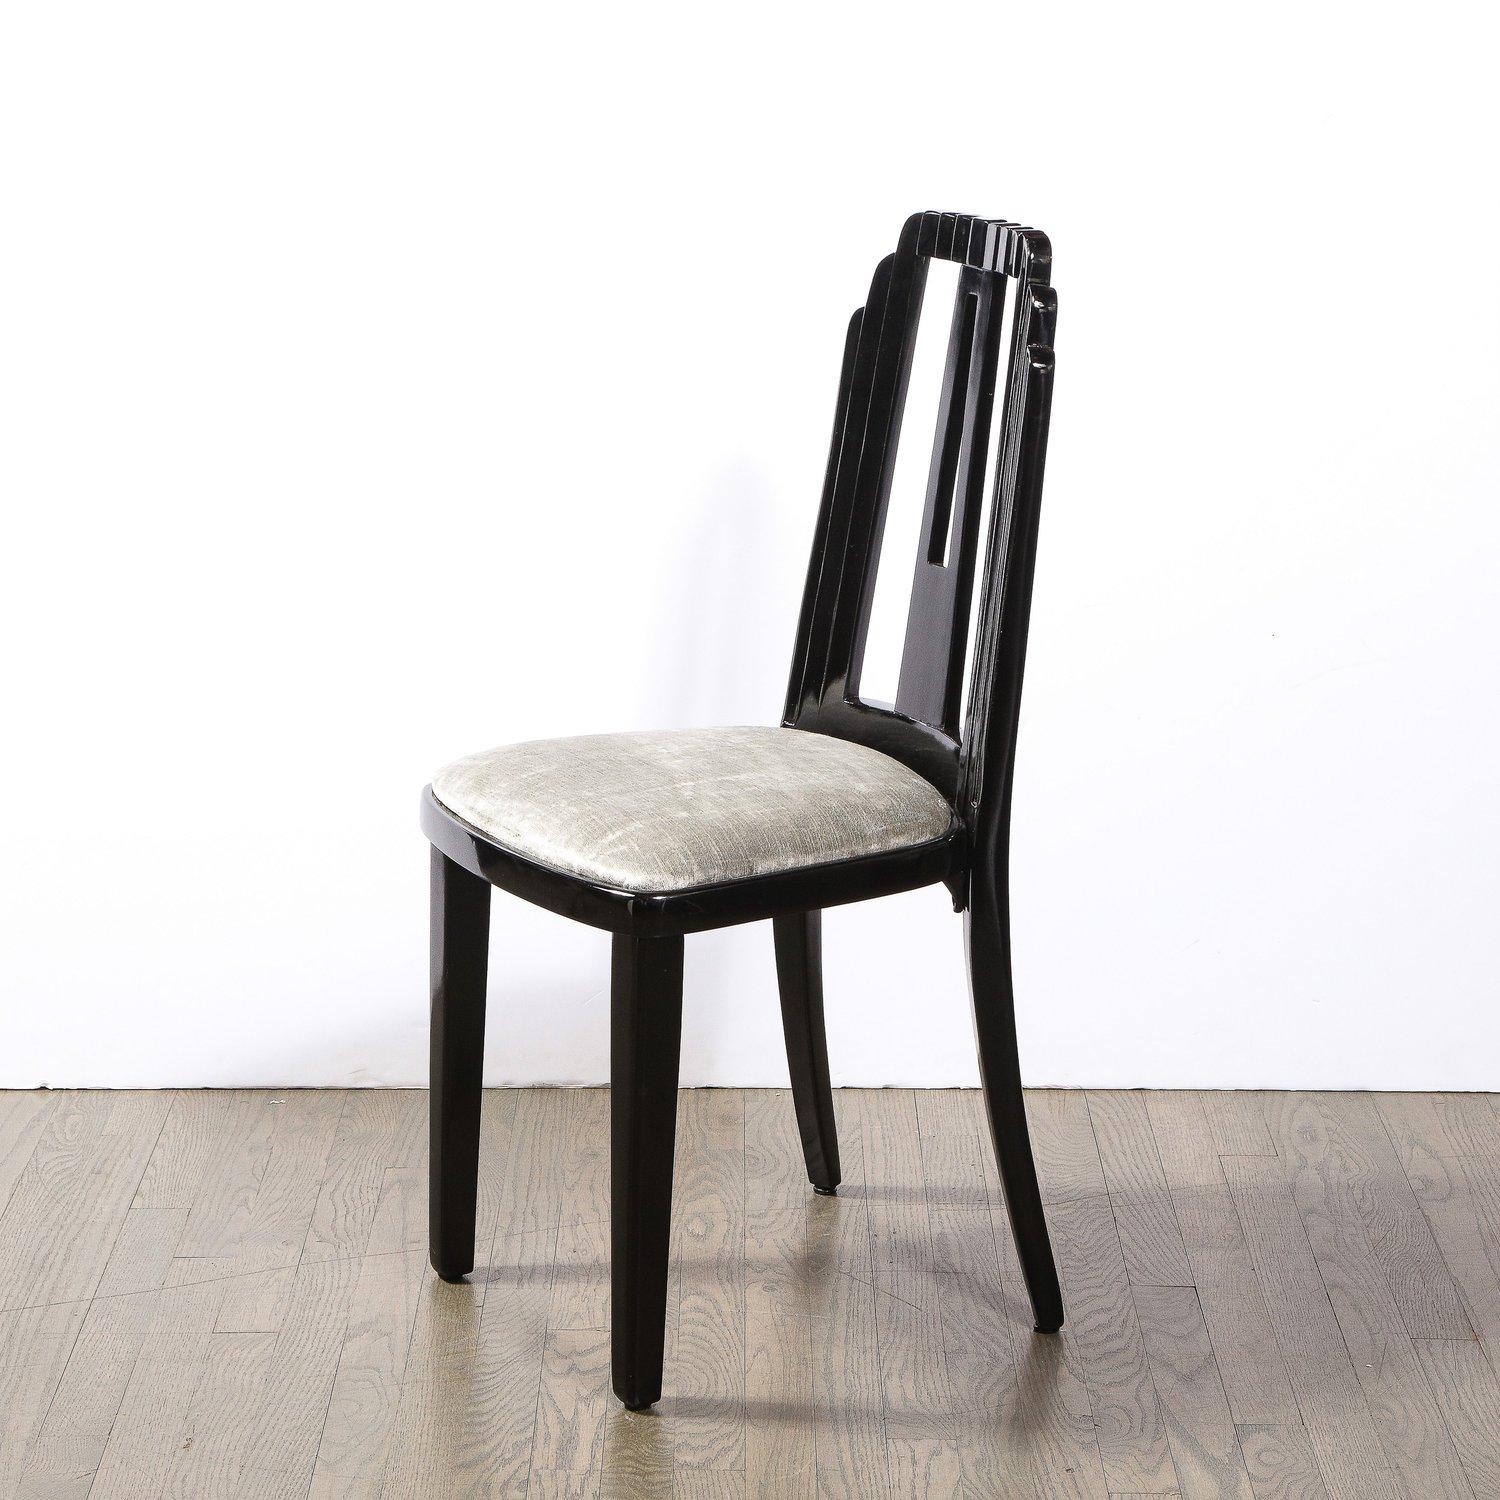 Art Deco Skyscraper Style Dining Chair in Black Lacquer and Smoked Pewter Velvet For Sale 1